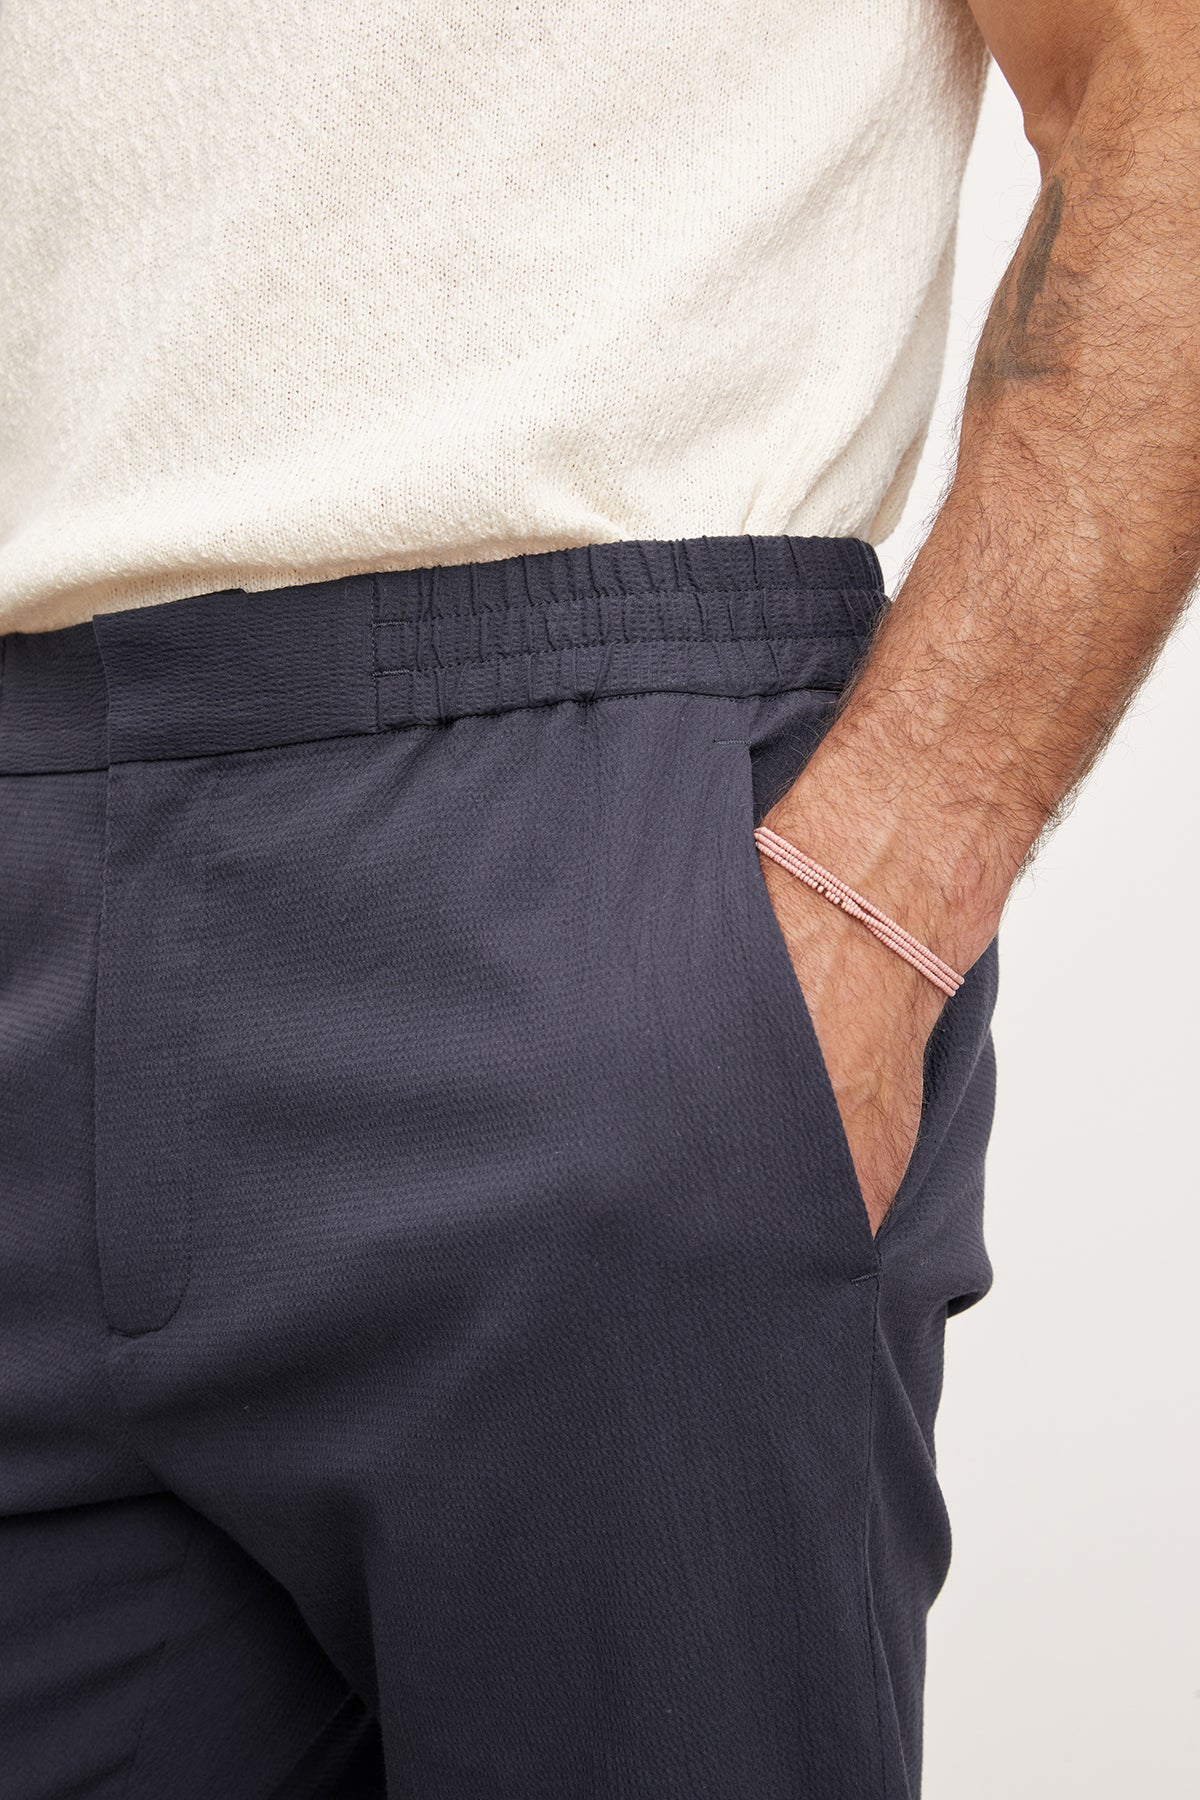 Close-up of a man's side, showing Velvet by Graham & Spencer navy blue seersucker cotton Willem pants with an elastic waistband and a single pocket, against a light beige sweater.-36909304742081